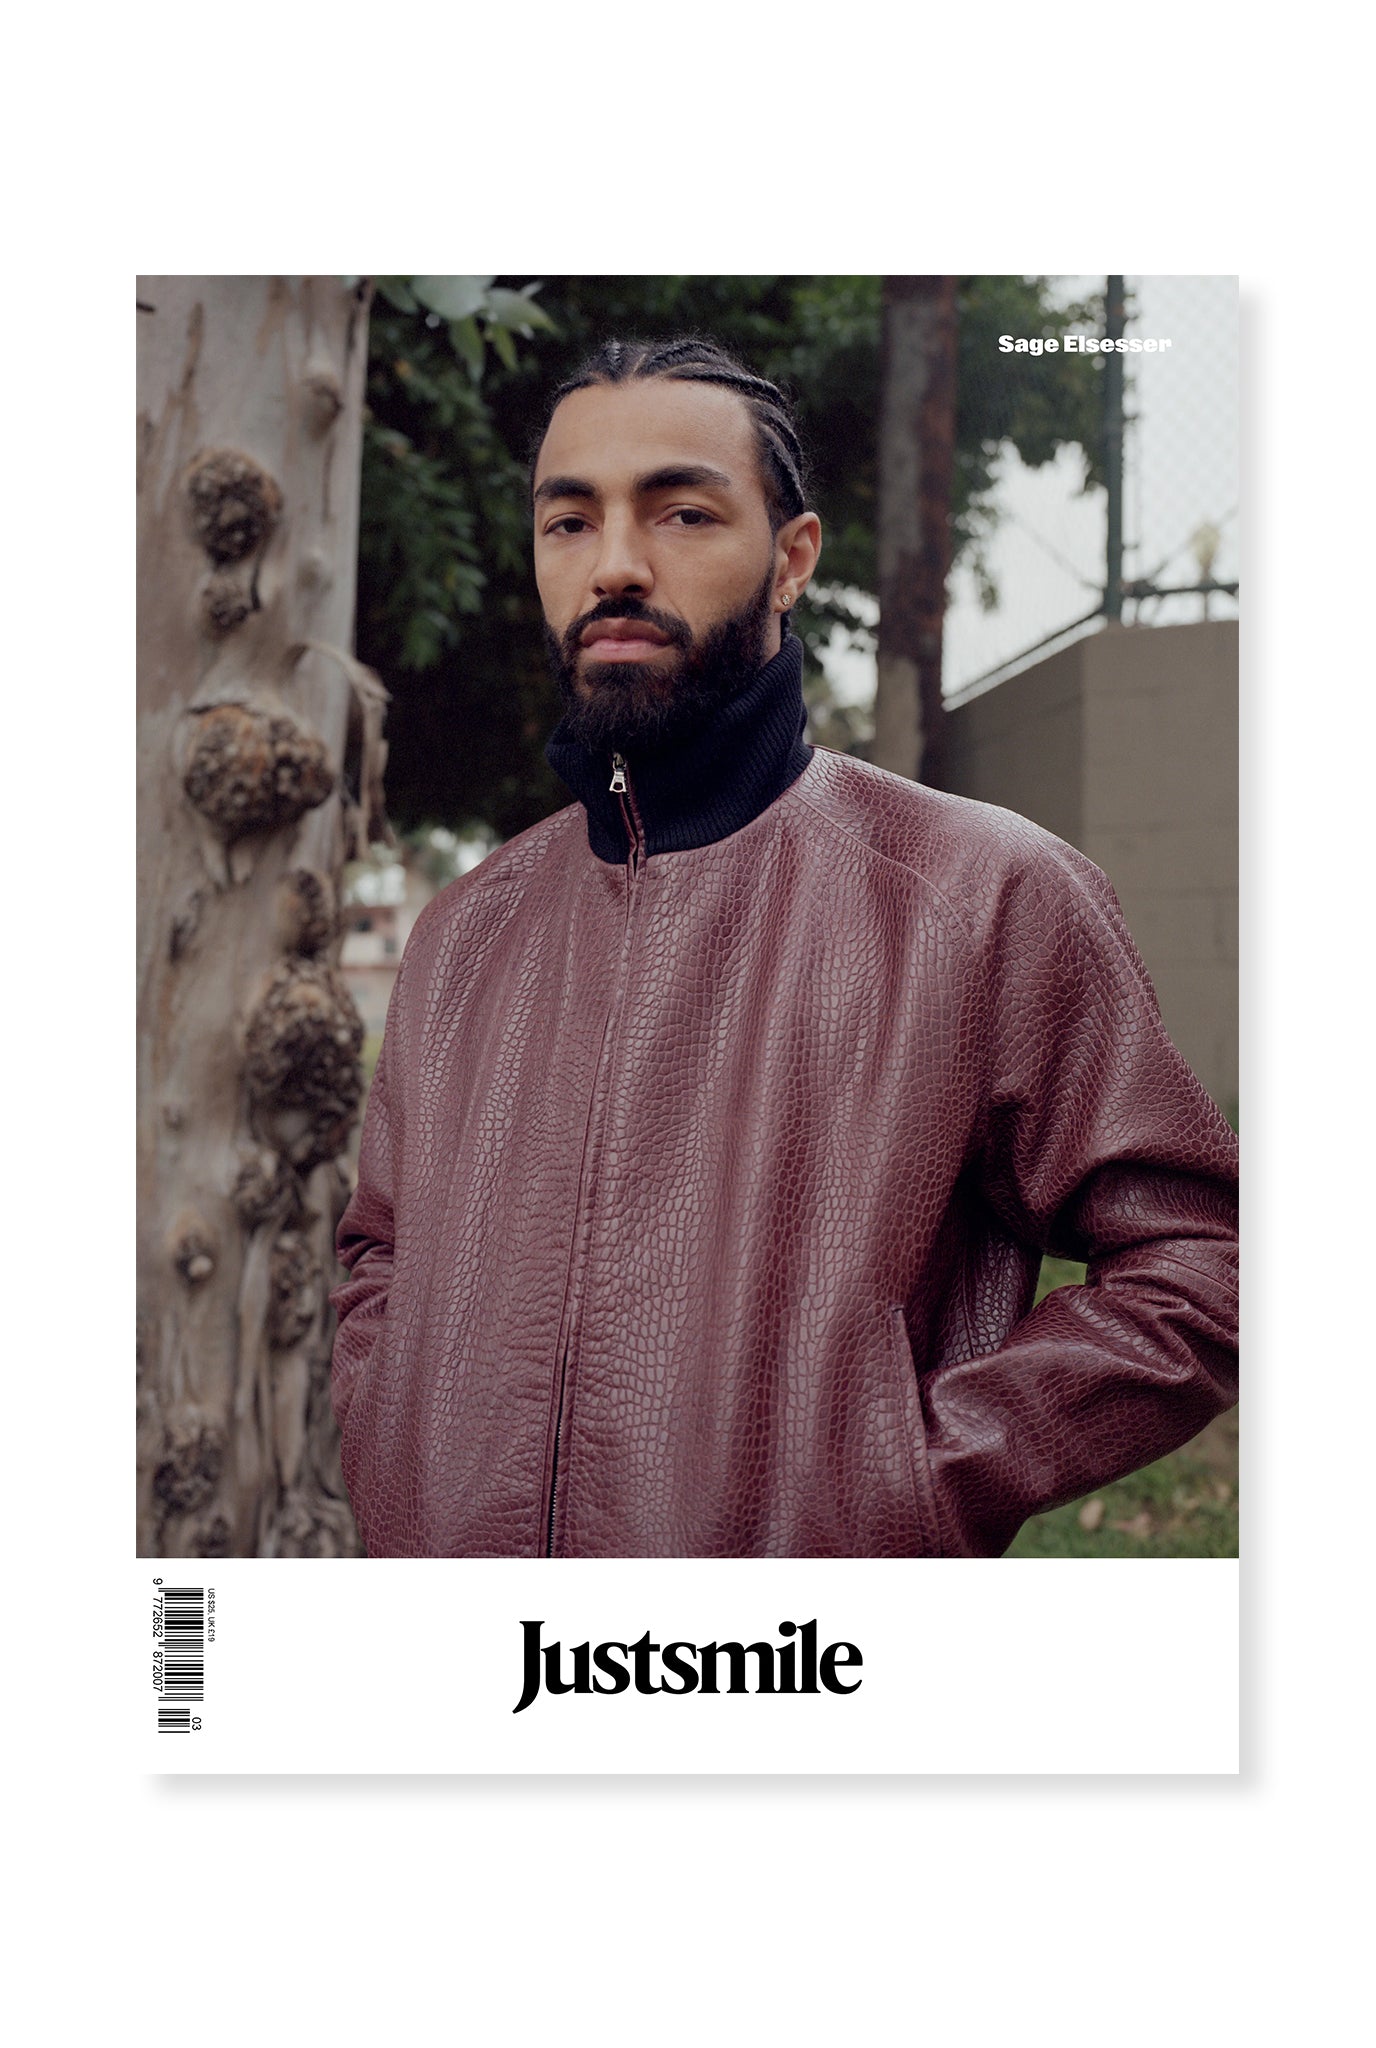 Justsmile, Issue 3